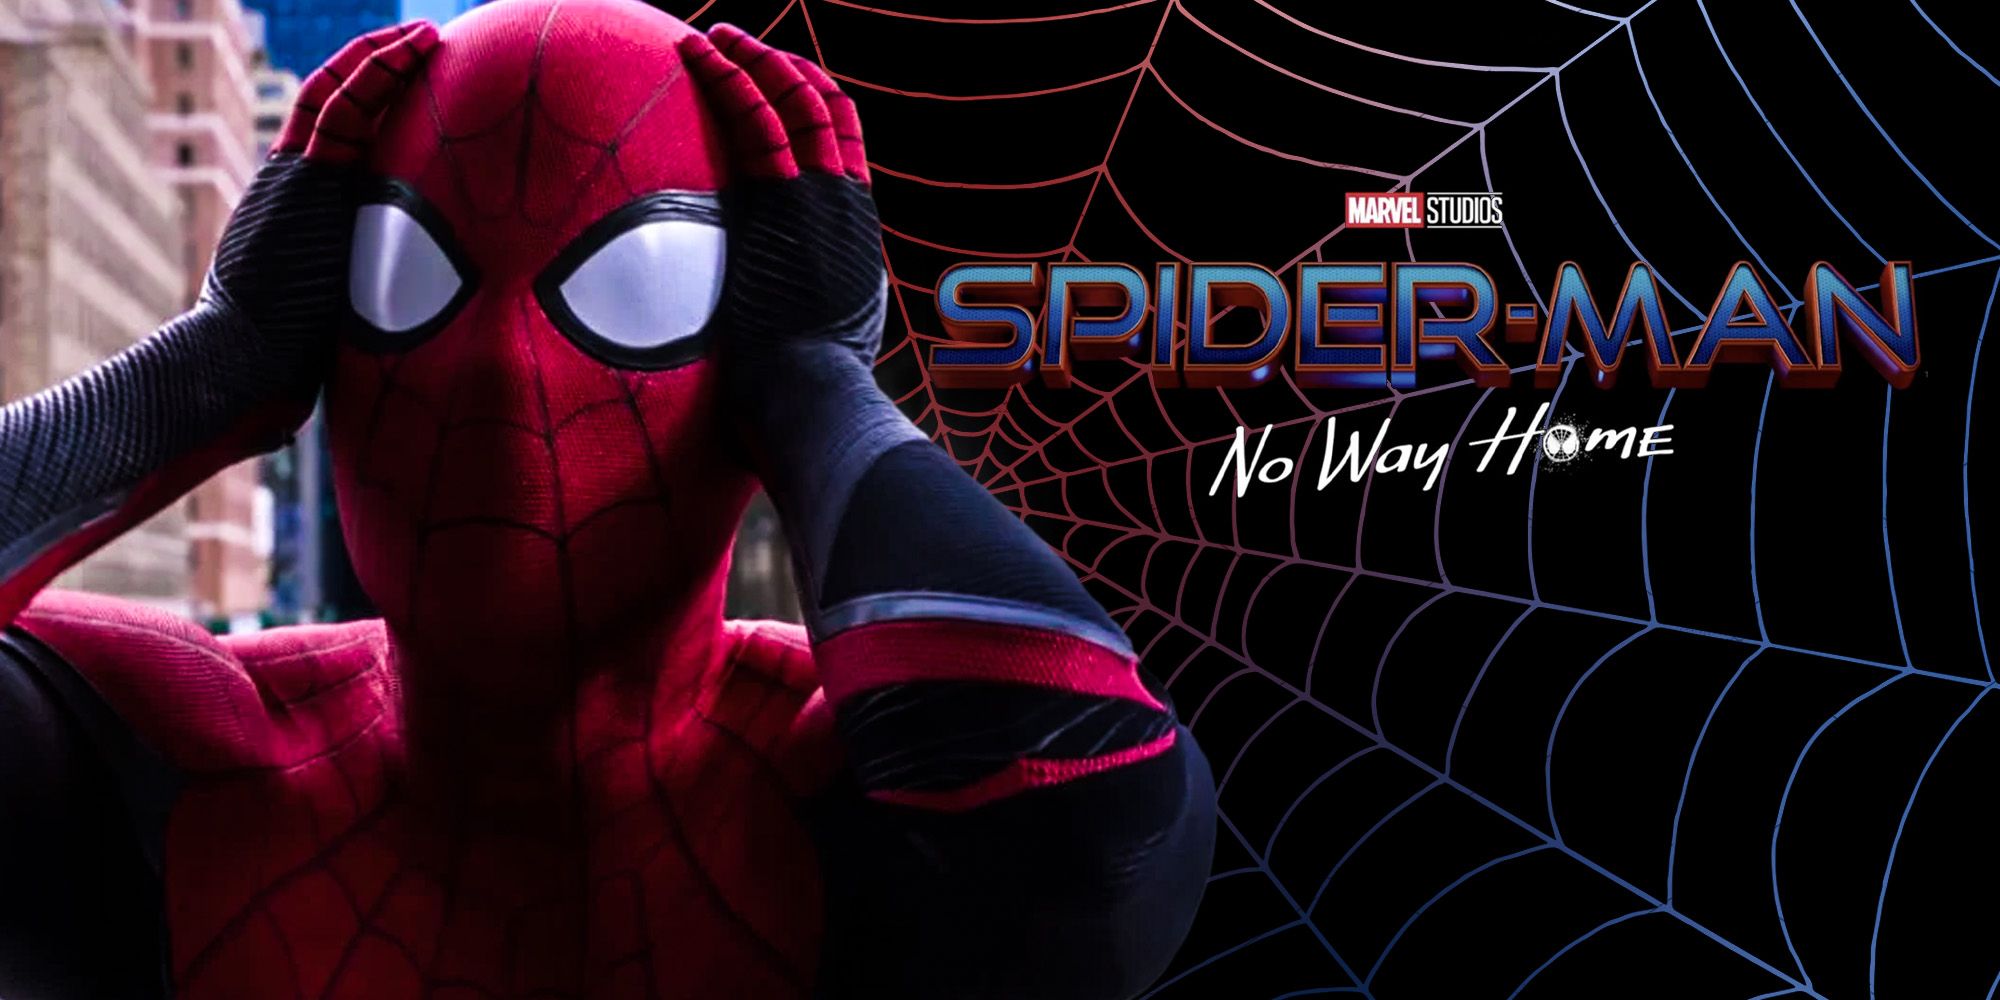 Spider-Man: No Way Home Trailer Releasing Before Film, Says Kevin Feige